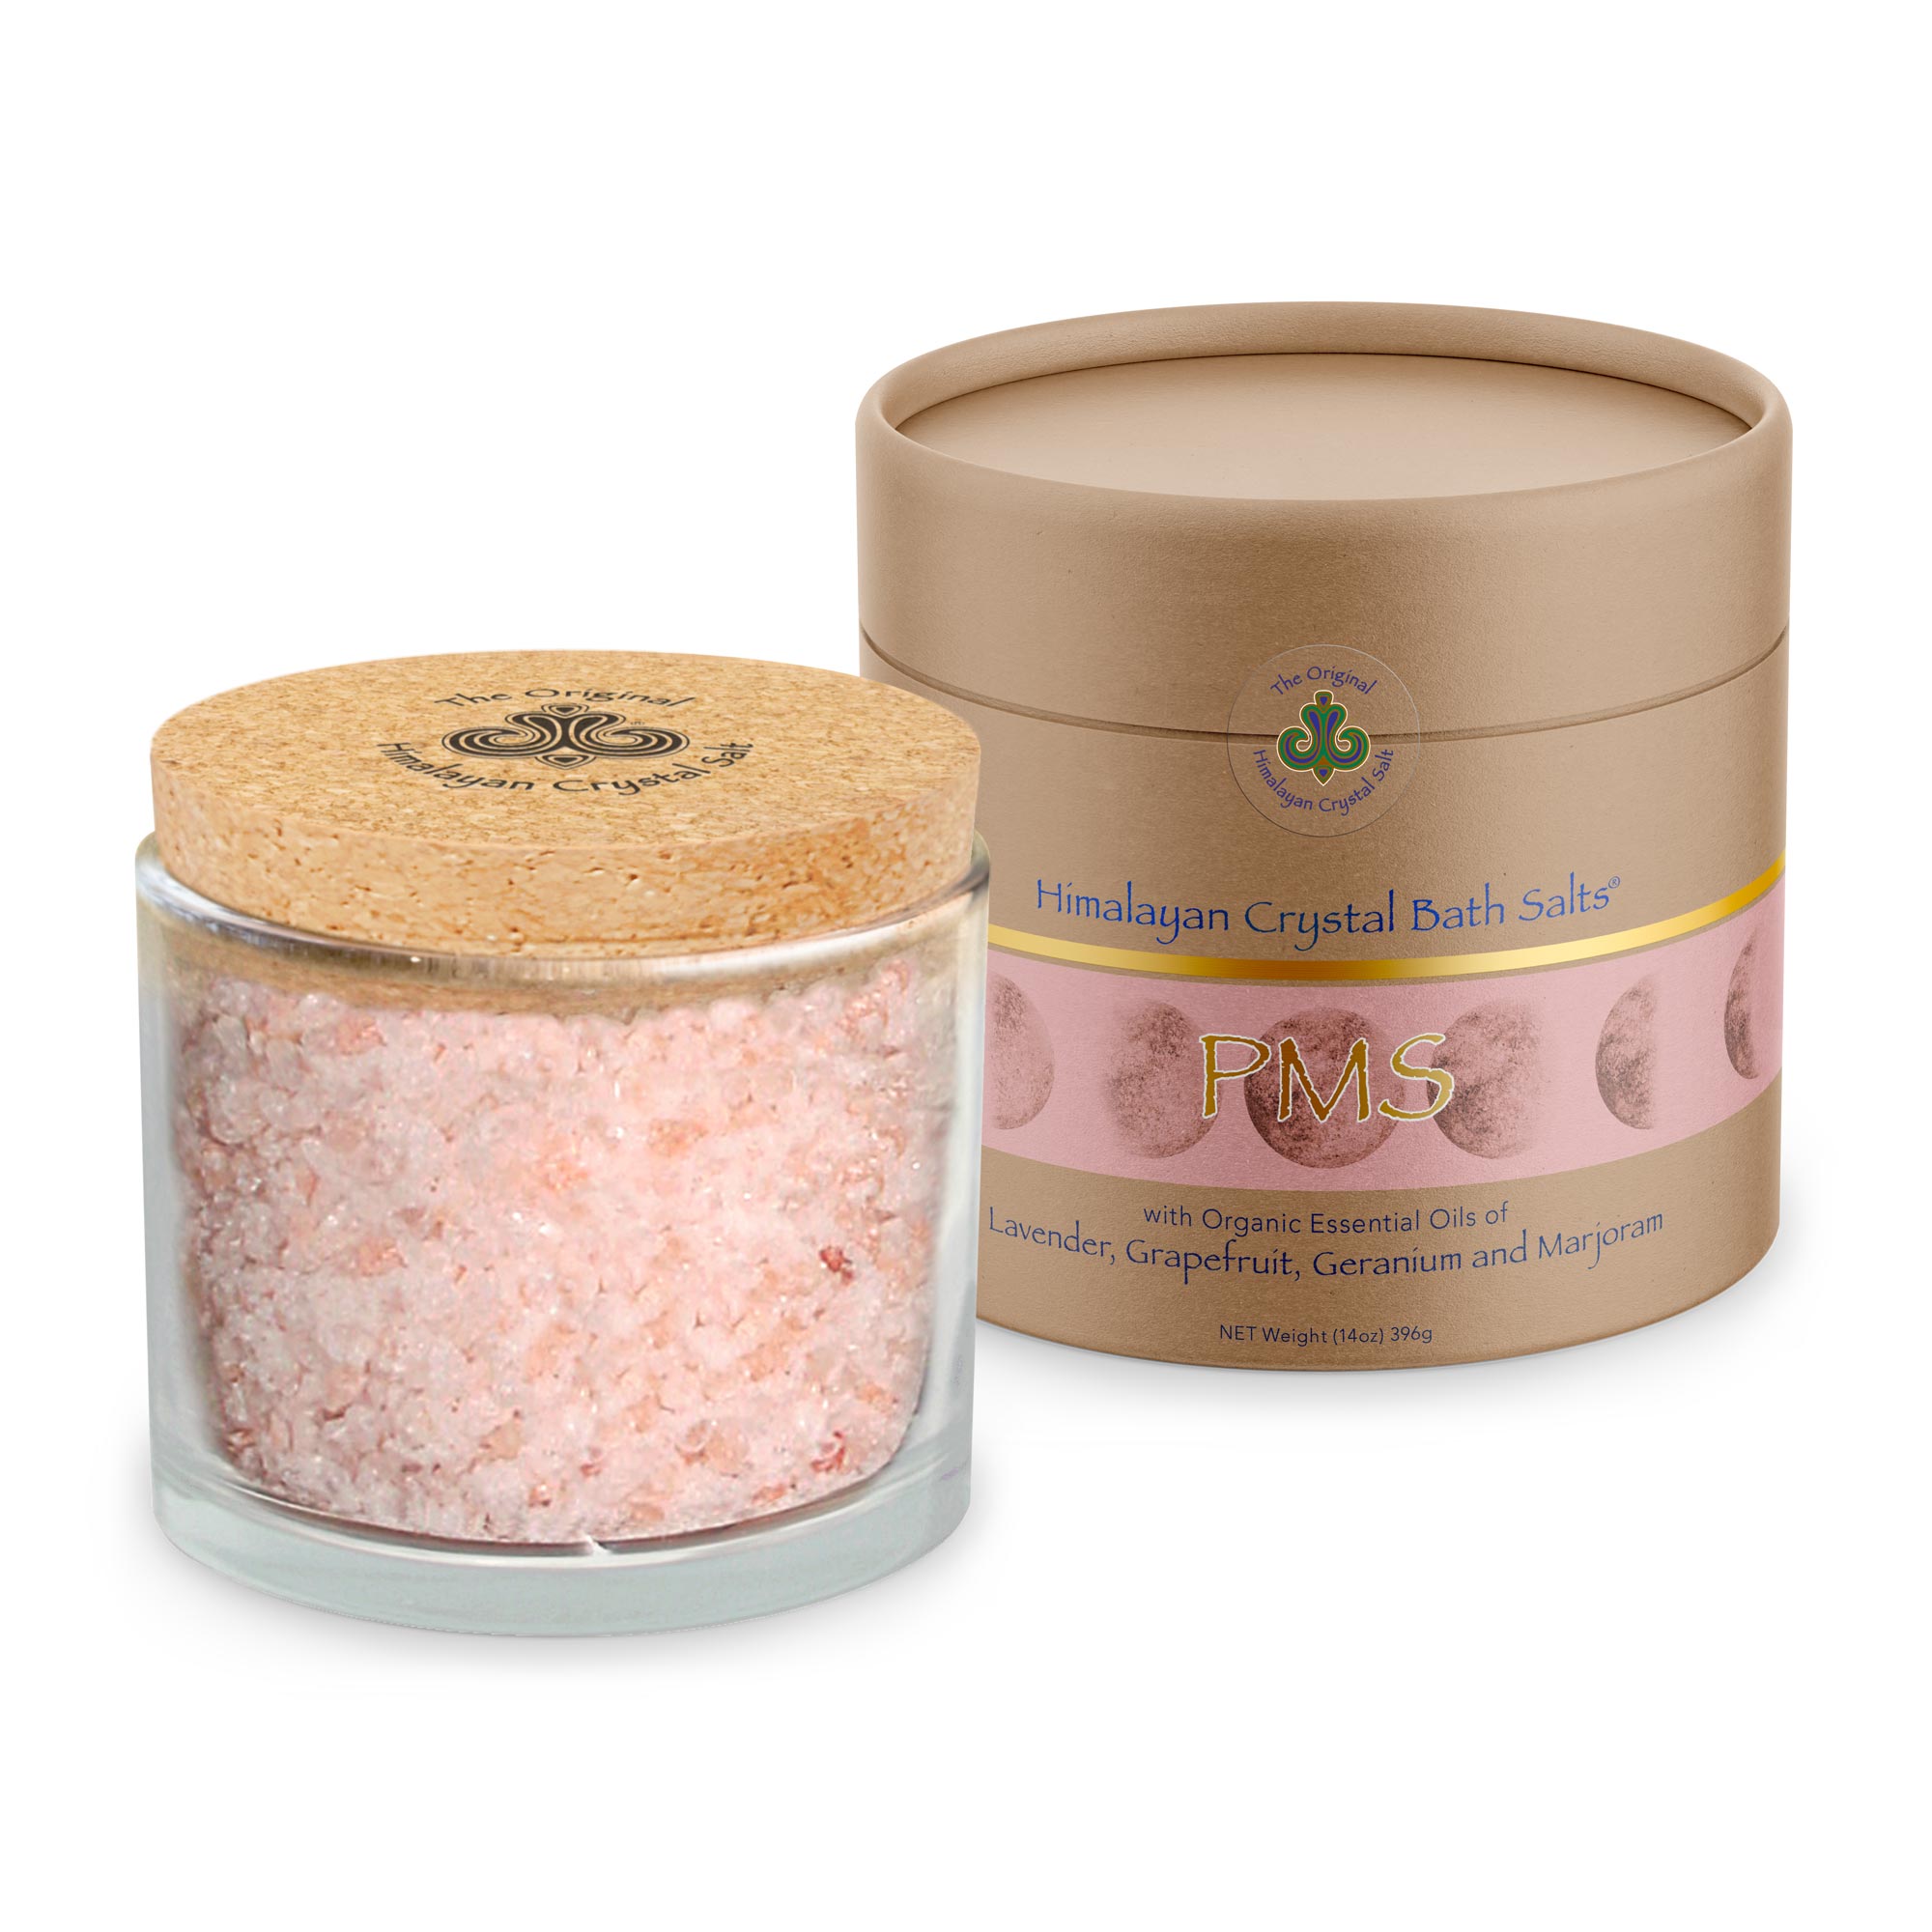 PMS Bath Salts product glass jar filled with Himalayan Crystal Salt stones with salts, cork cover and tan product box with bands of gold and pink, with illustrated phases of the moon both featuring Himalayan Crystal Salt logo, on white background